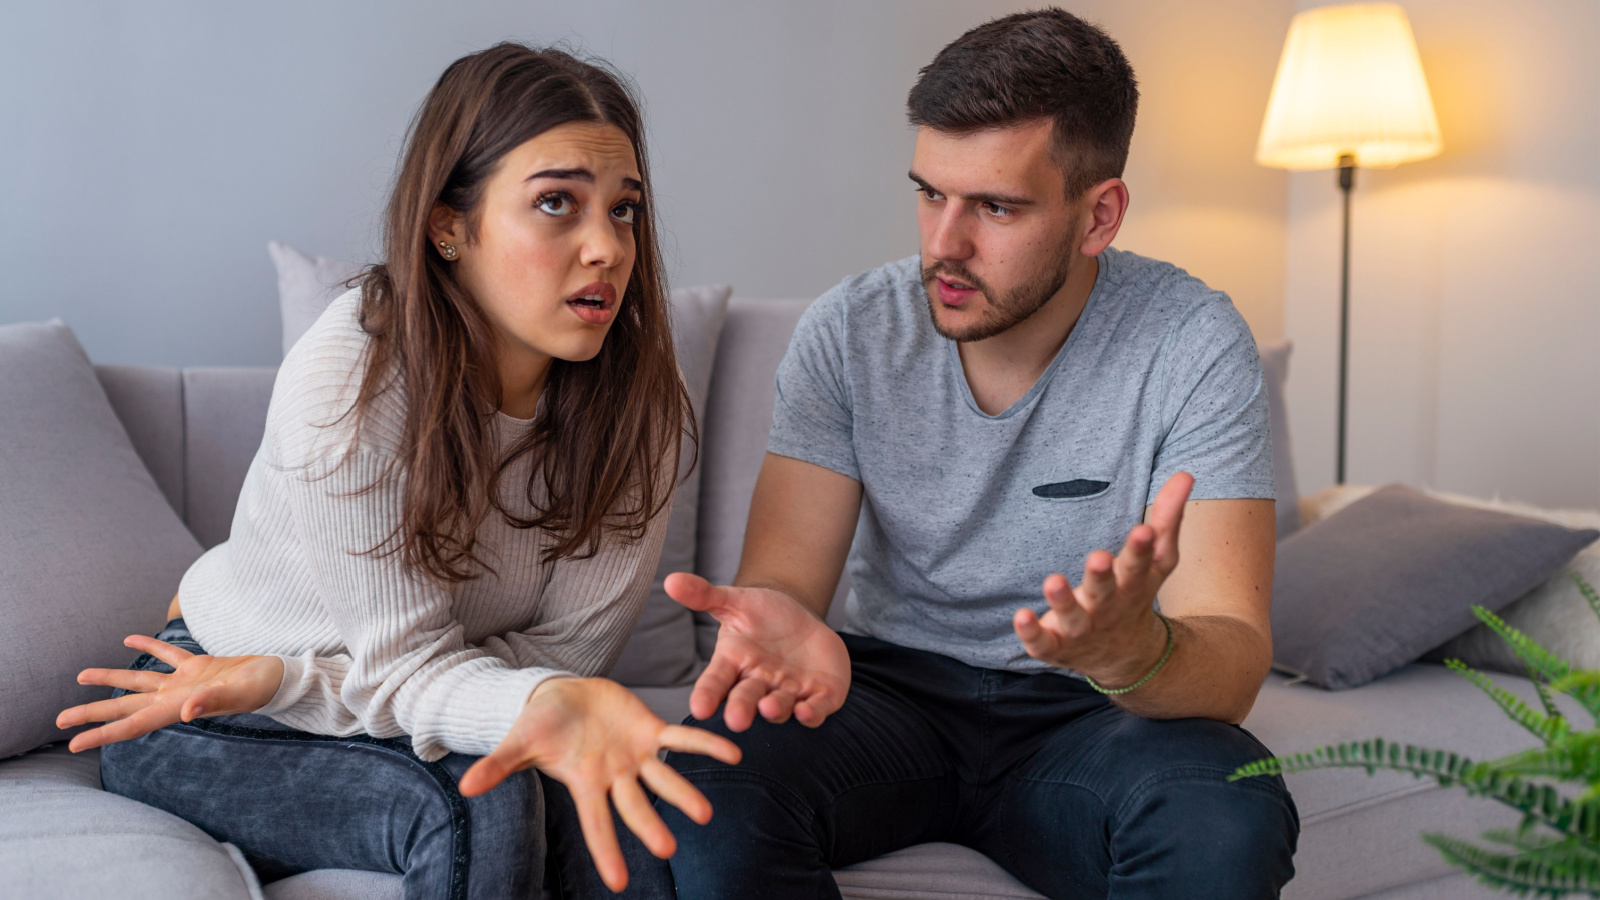 image credit: dragana-gordic/shutterstock <p><span>Even if you disagree, acknowledging their concerns shows respect. It demonstrates you’re listening and considering their viewpoint. This doesn’t mean you agree, but it fosters a respectful dialogue.</span></p>